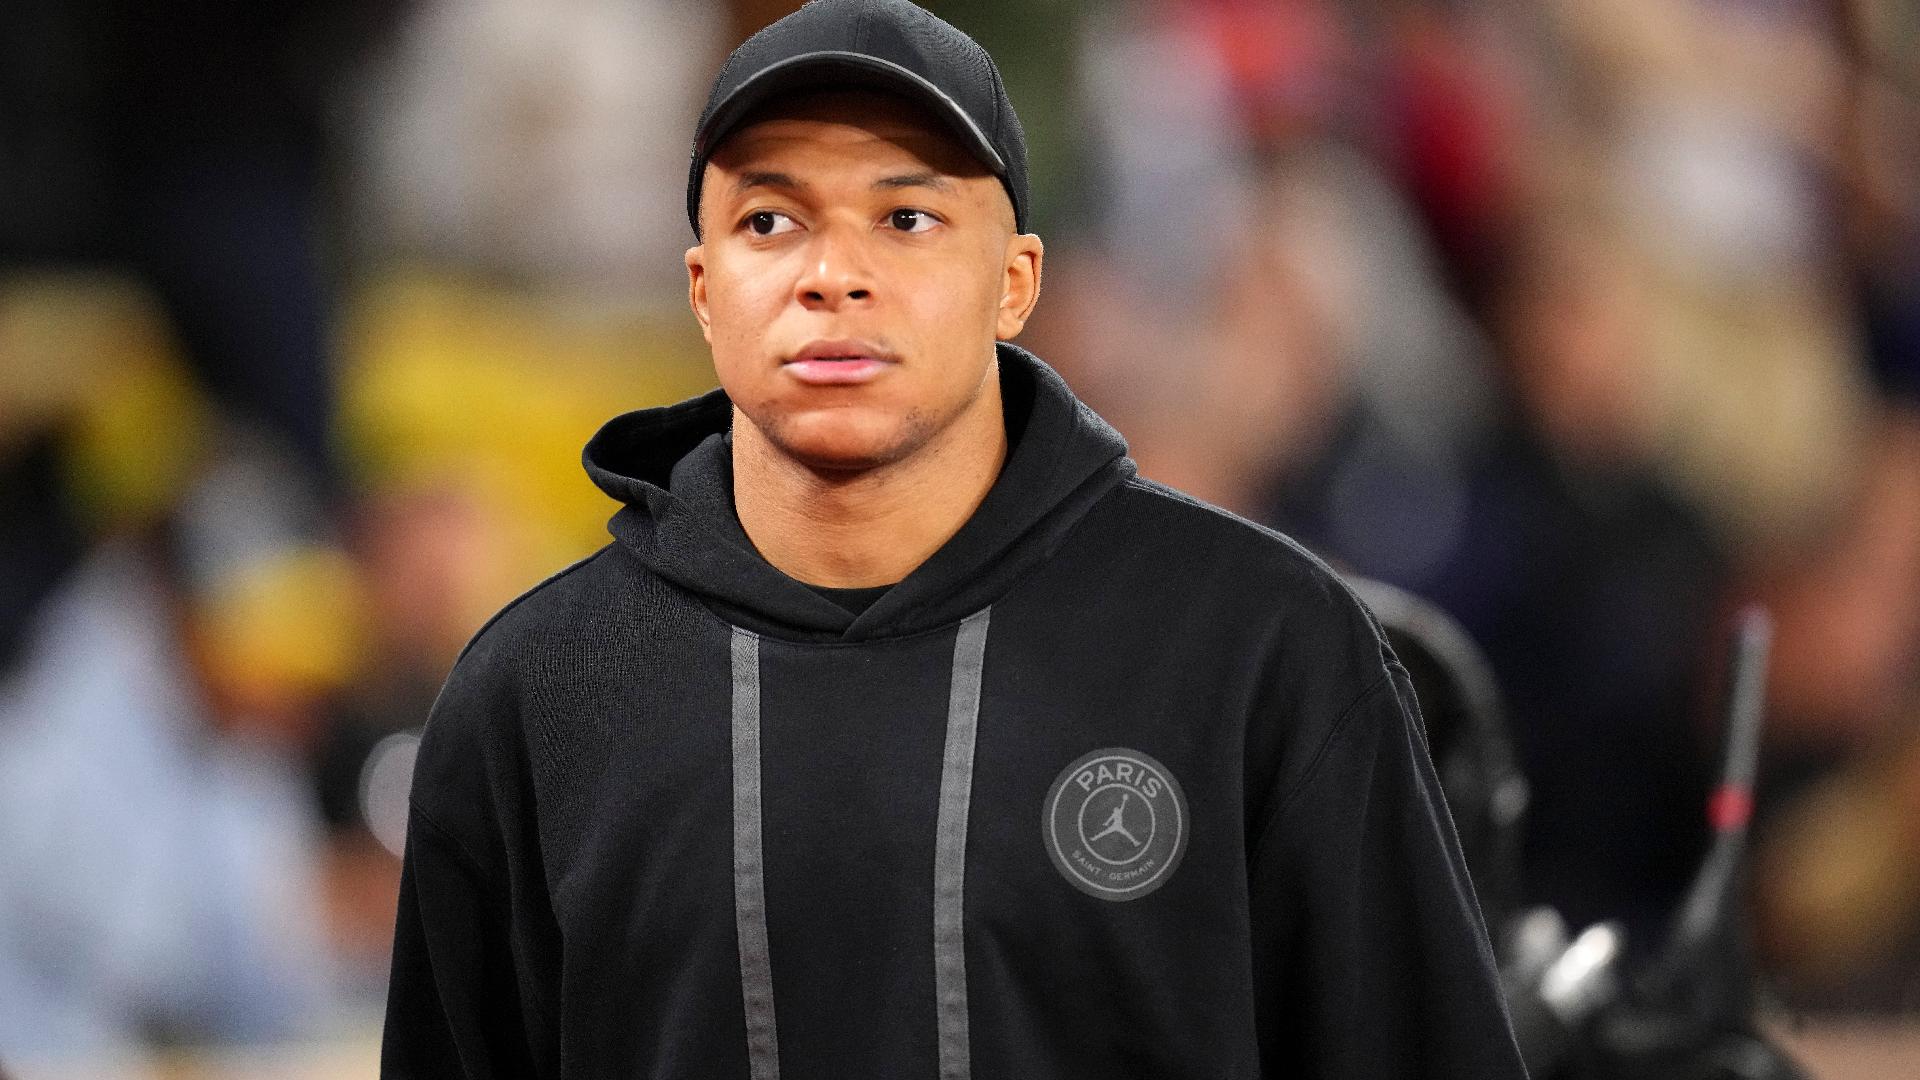 Kylian Mbappe heads for stands after half-time exit in draw with Monaco